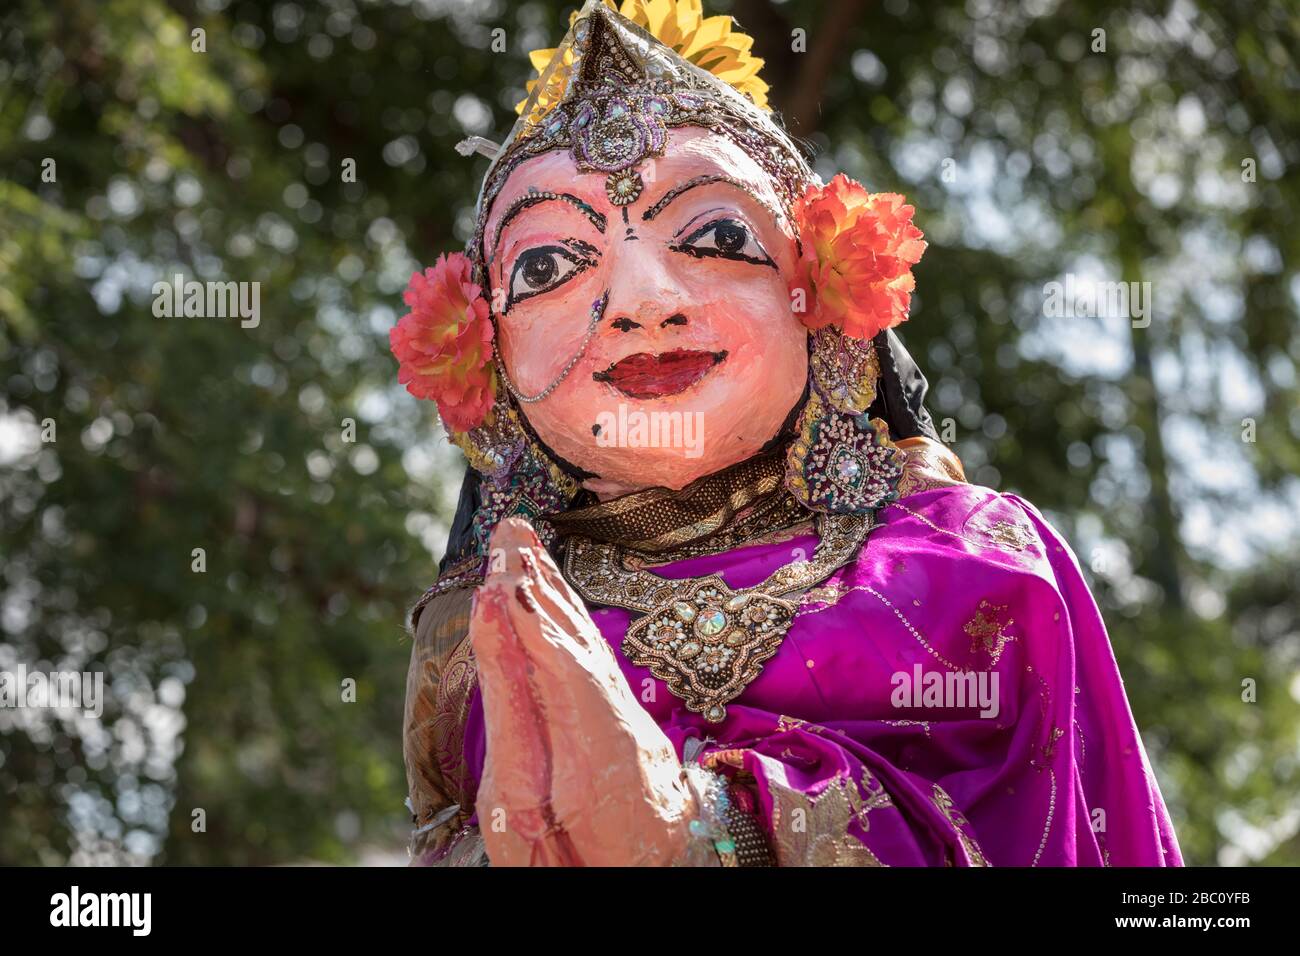 Large puppet of Hindu deity, elaborately decorated in sary, carried as part of a Chariot Procession and religious festival Stock Photo